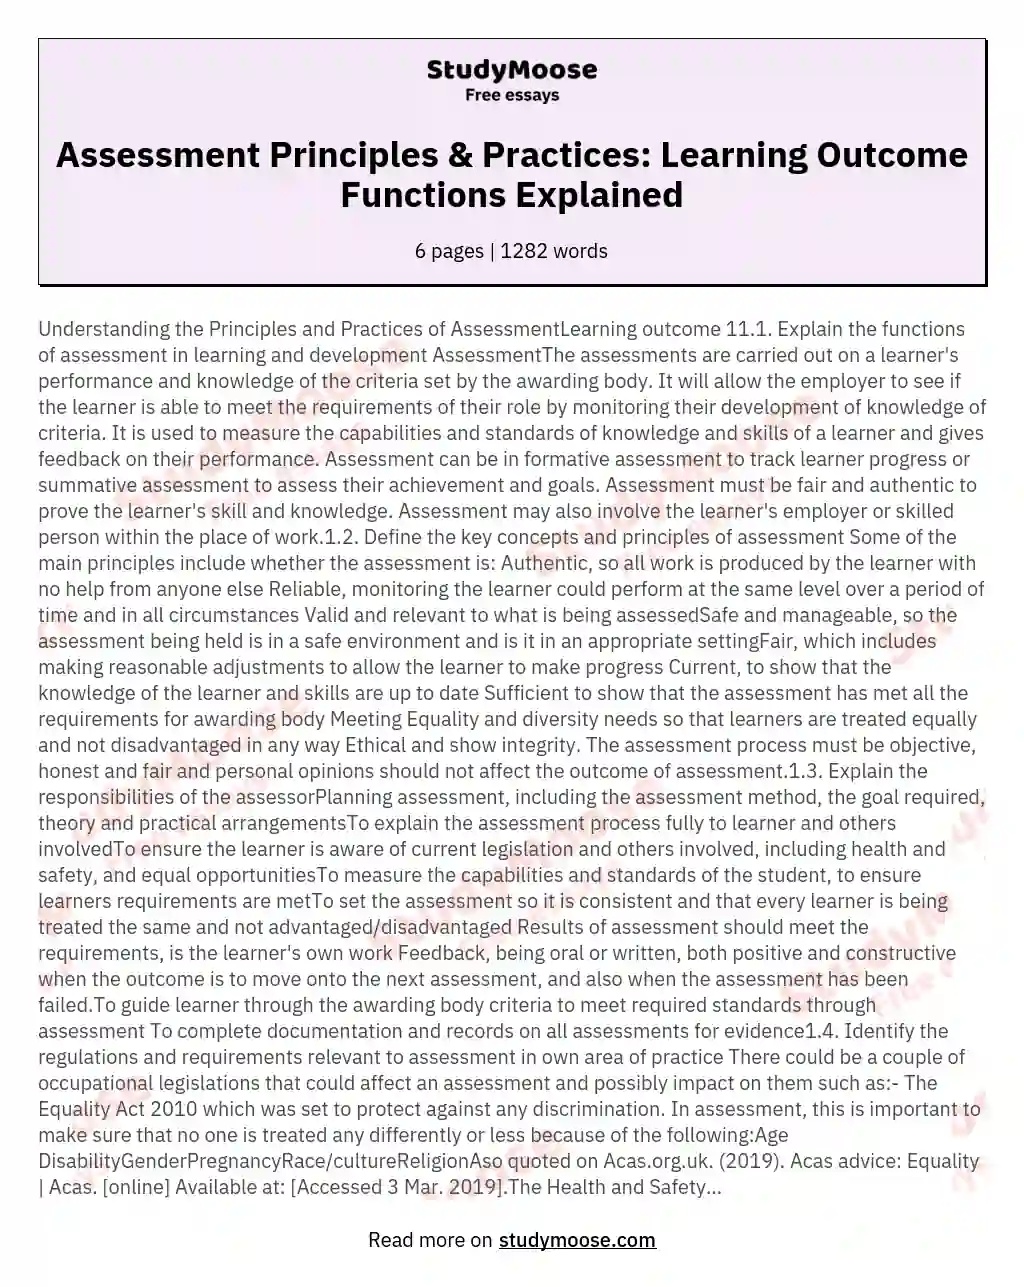 Assessment Principles & Practices: Learning Outcome  Functions Explained essay